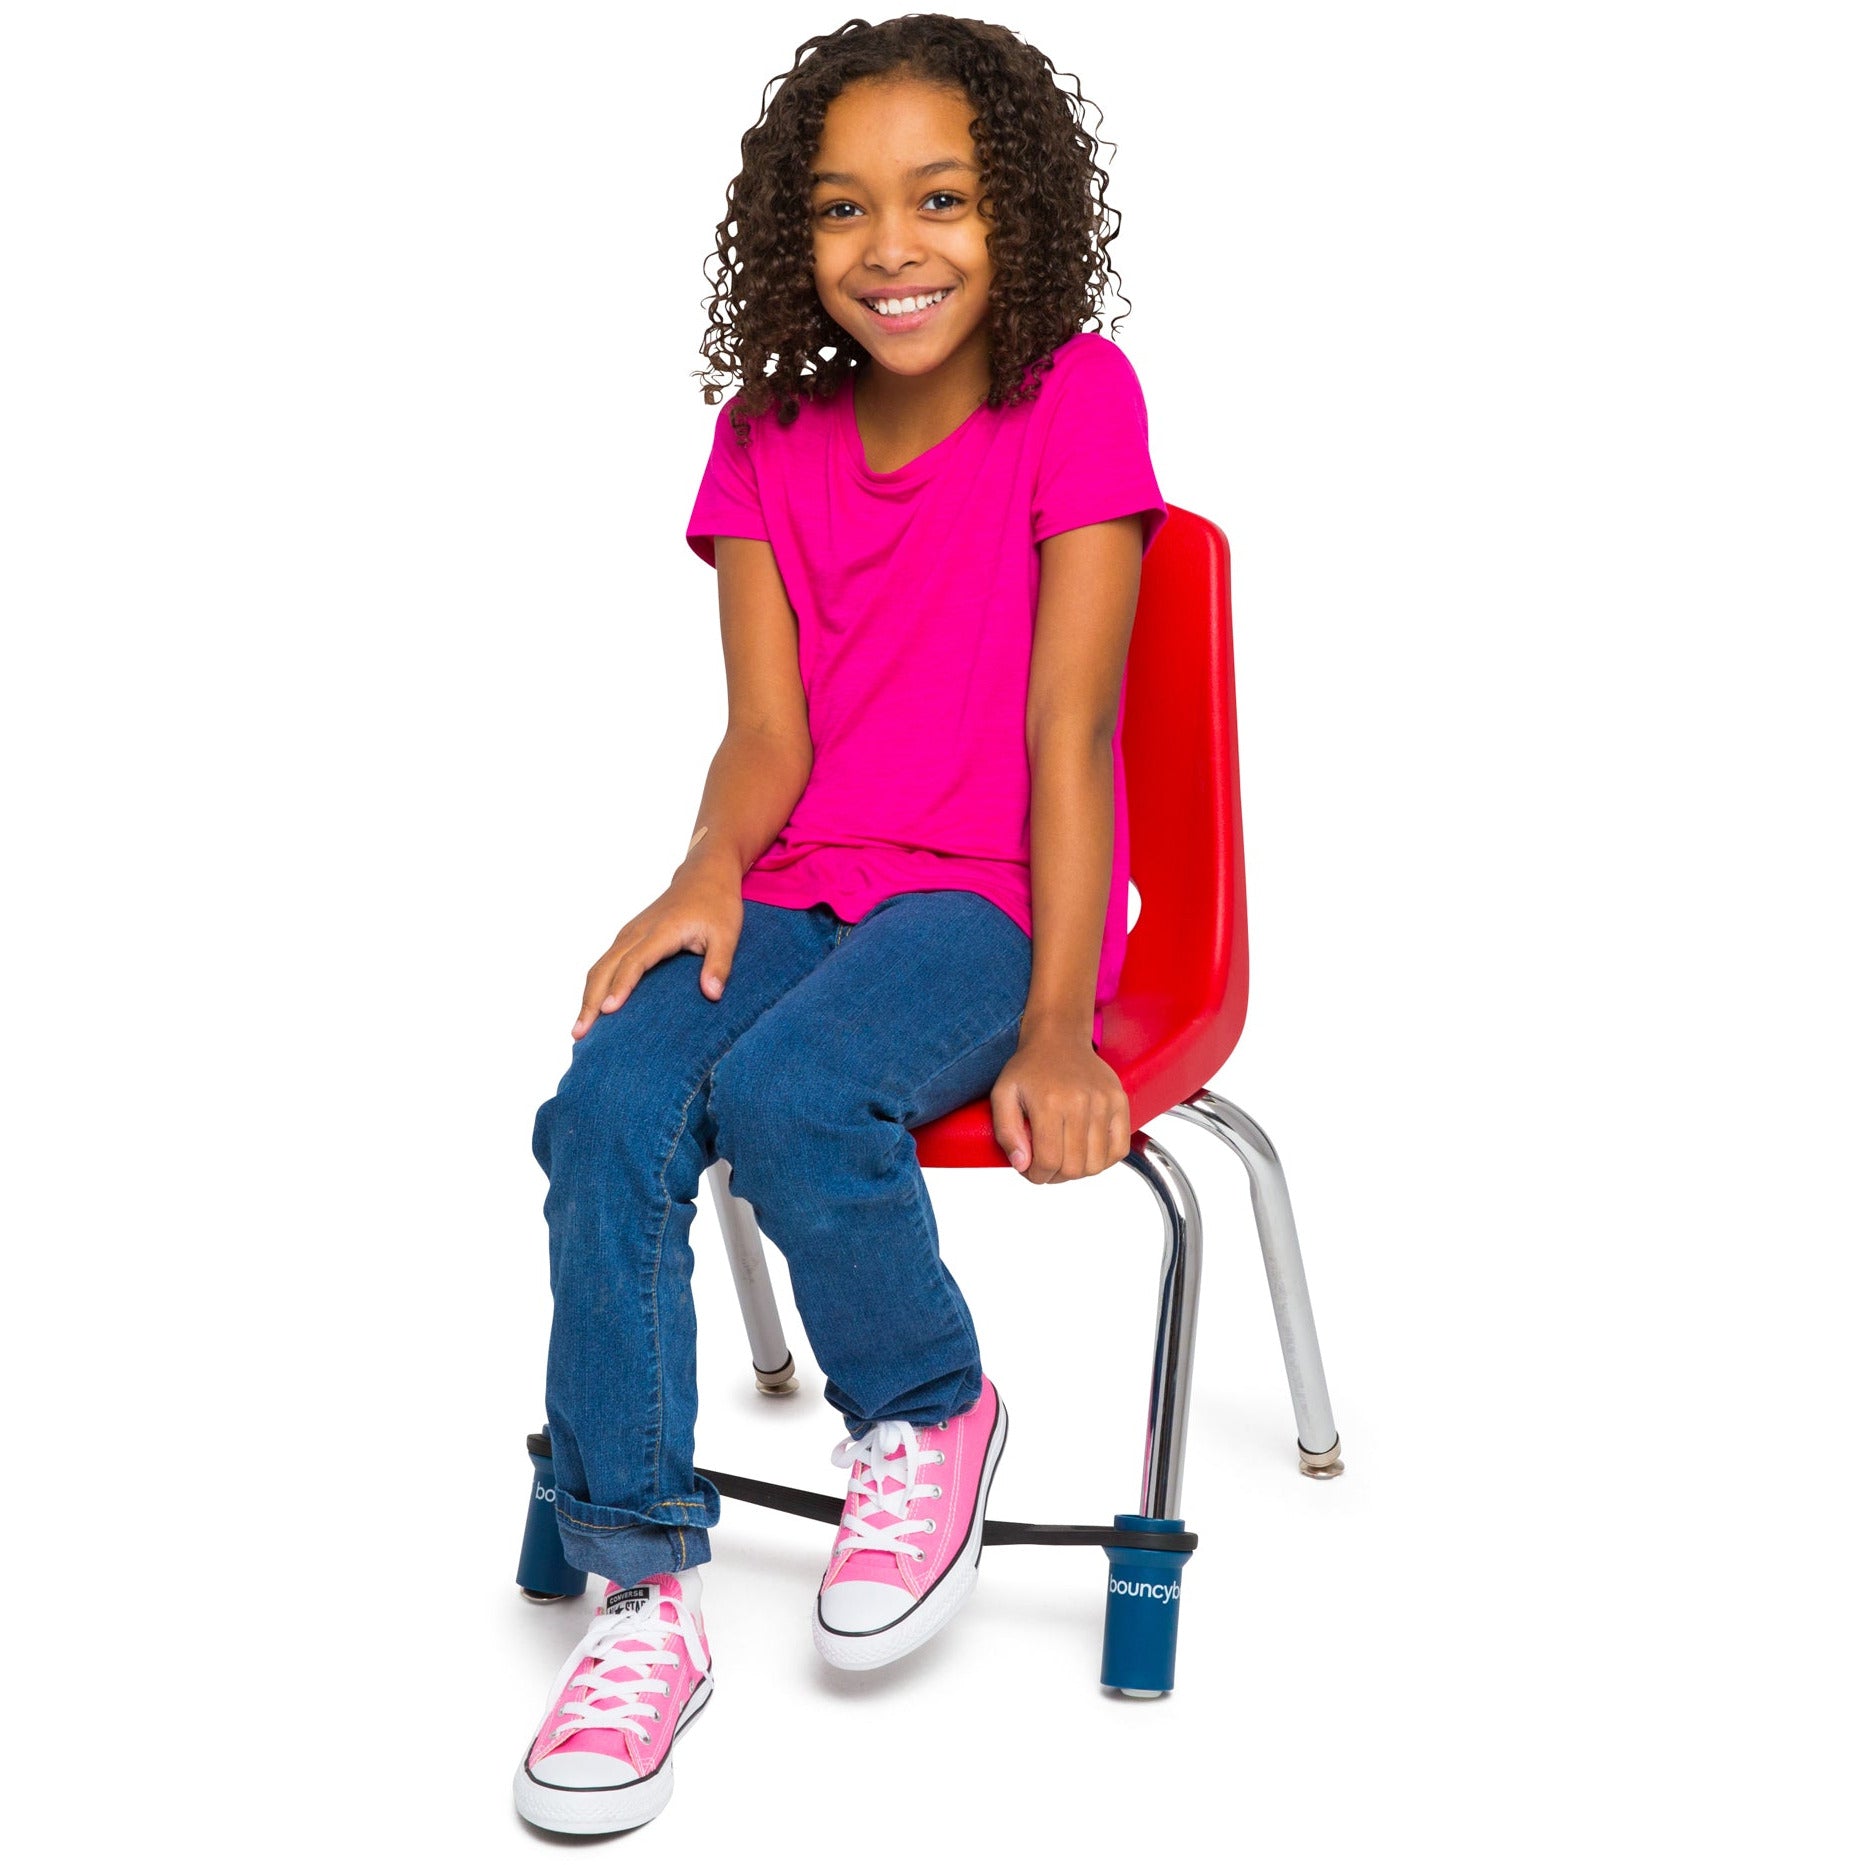 Bouncyband® Blue Bouncy Band for Elementary School Chairs